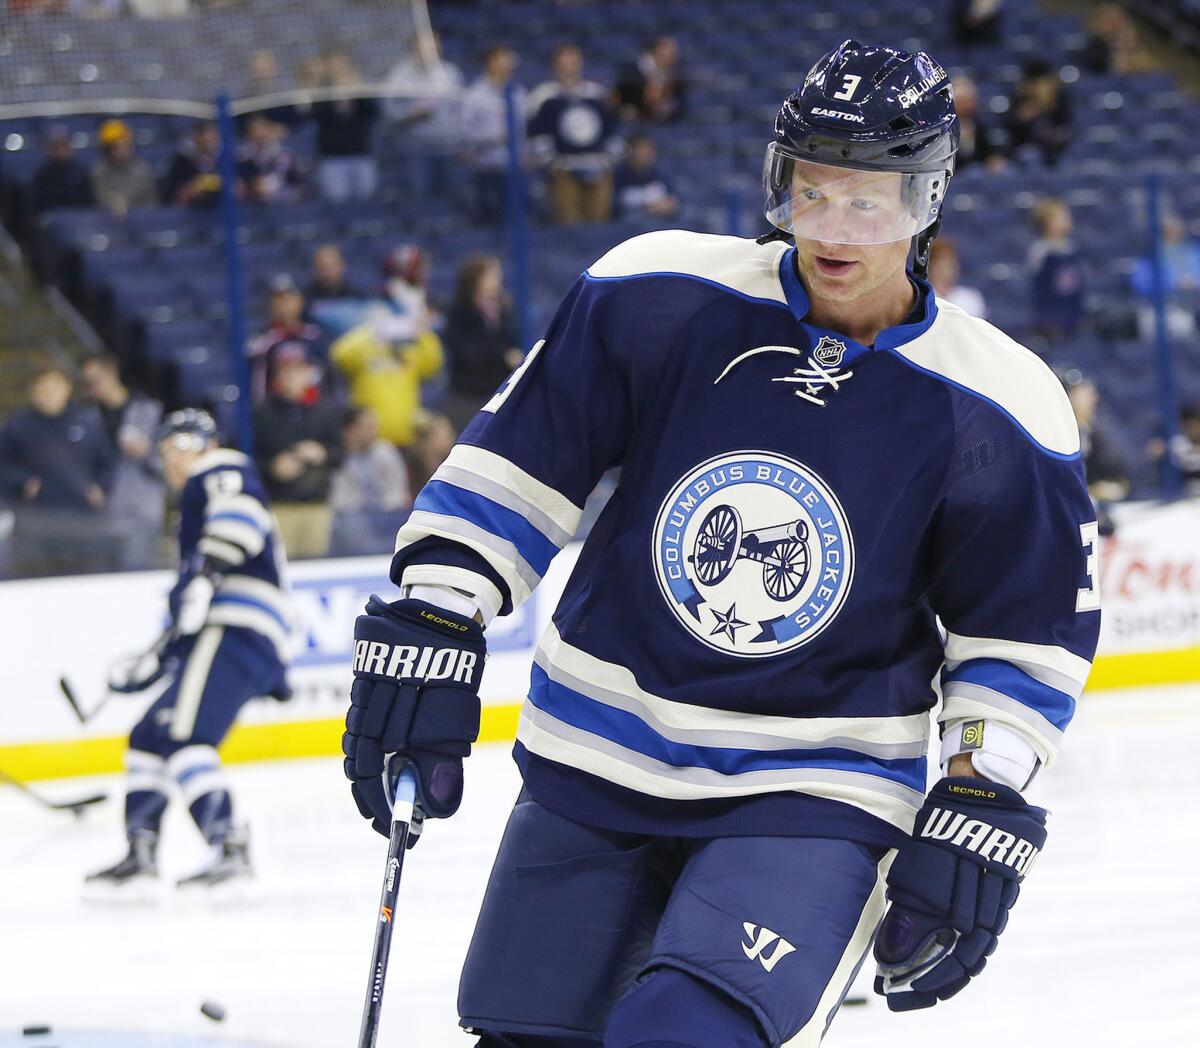 Jordan Leopold was traded by the Blue Jackets back home to Minnesota after his daughter wrote a letter pleading for his return.